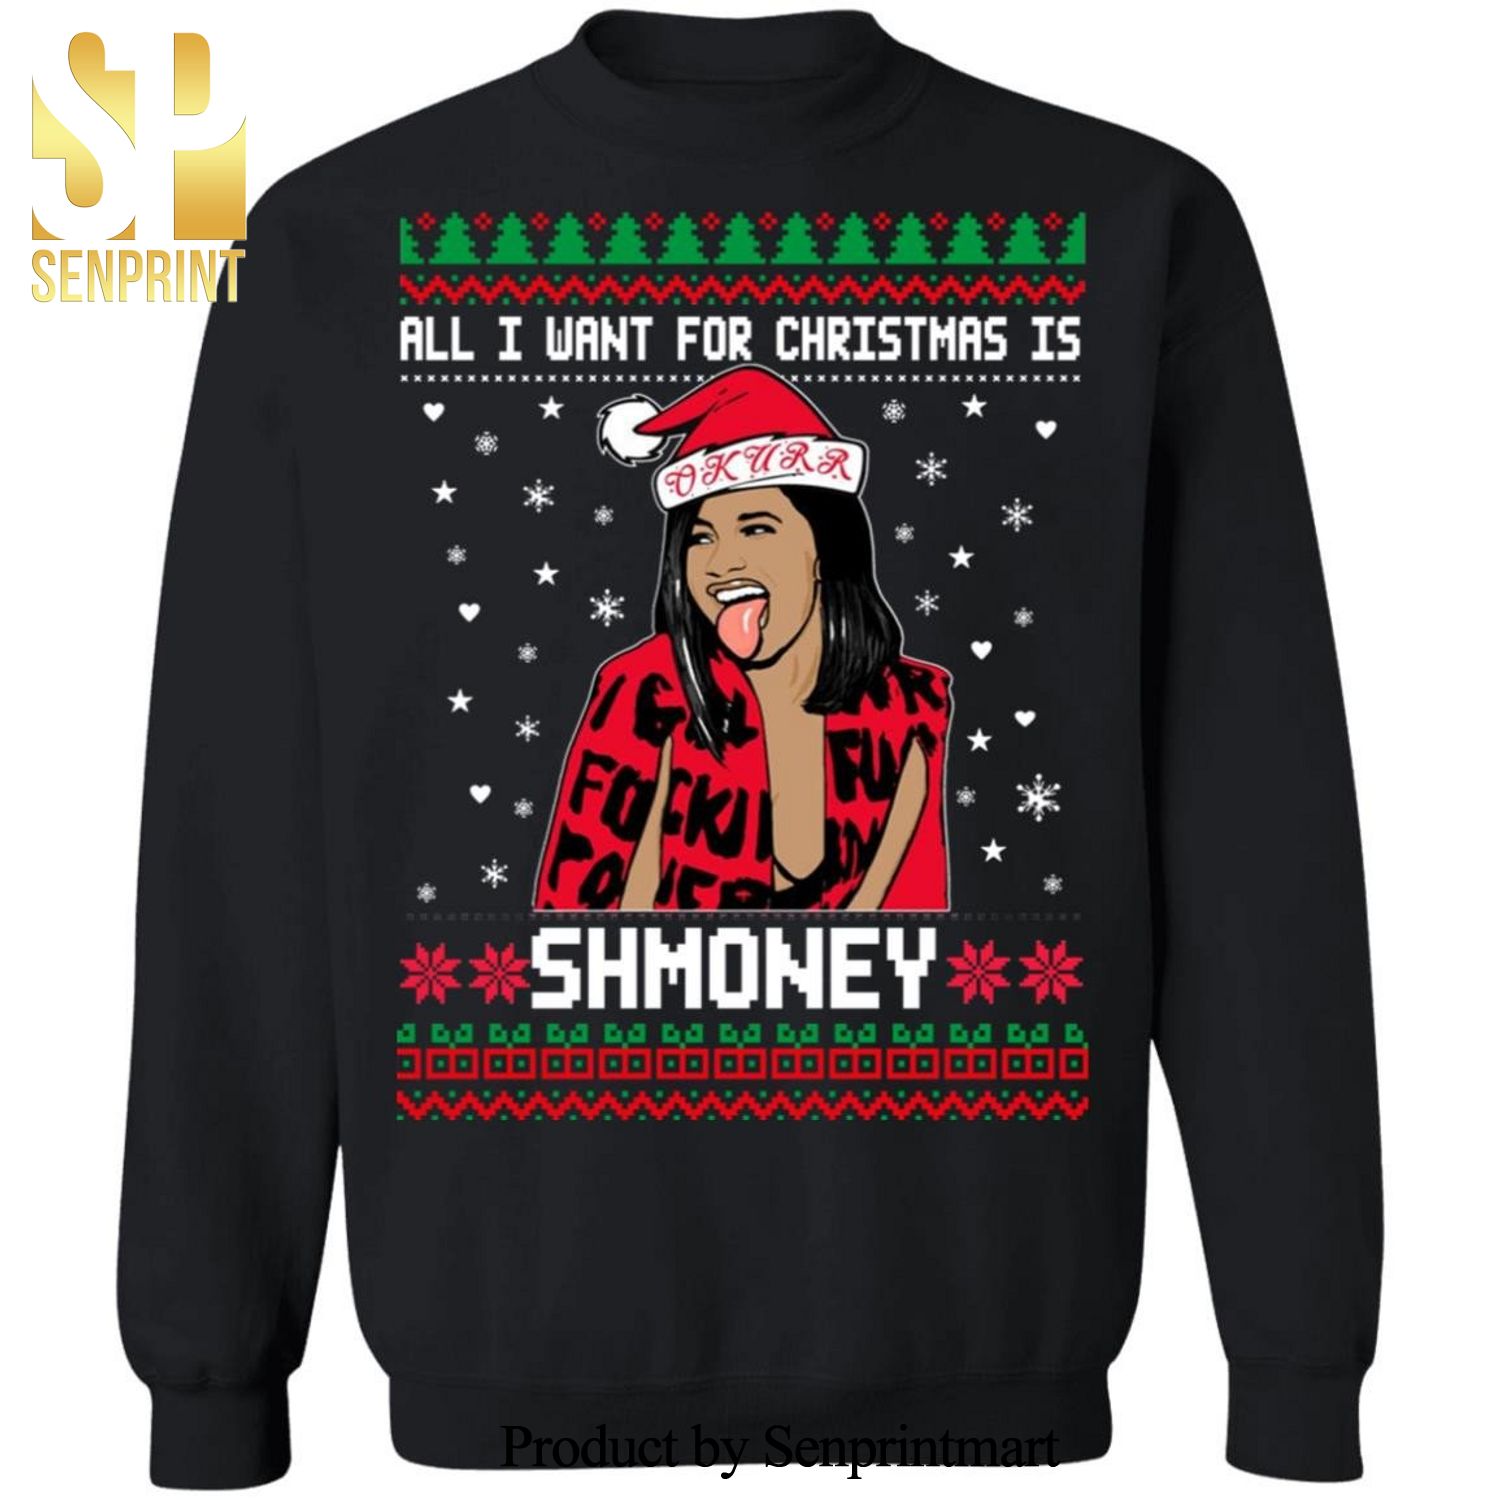 All I Want For Christmas Is Shmoney Cardi B Knitted Ugly Christmas Sweater